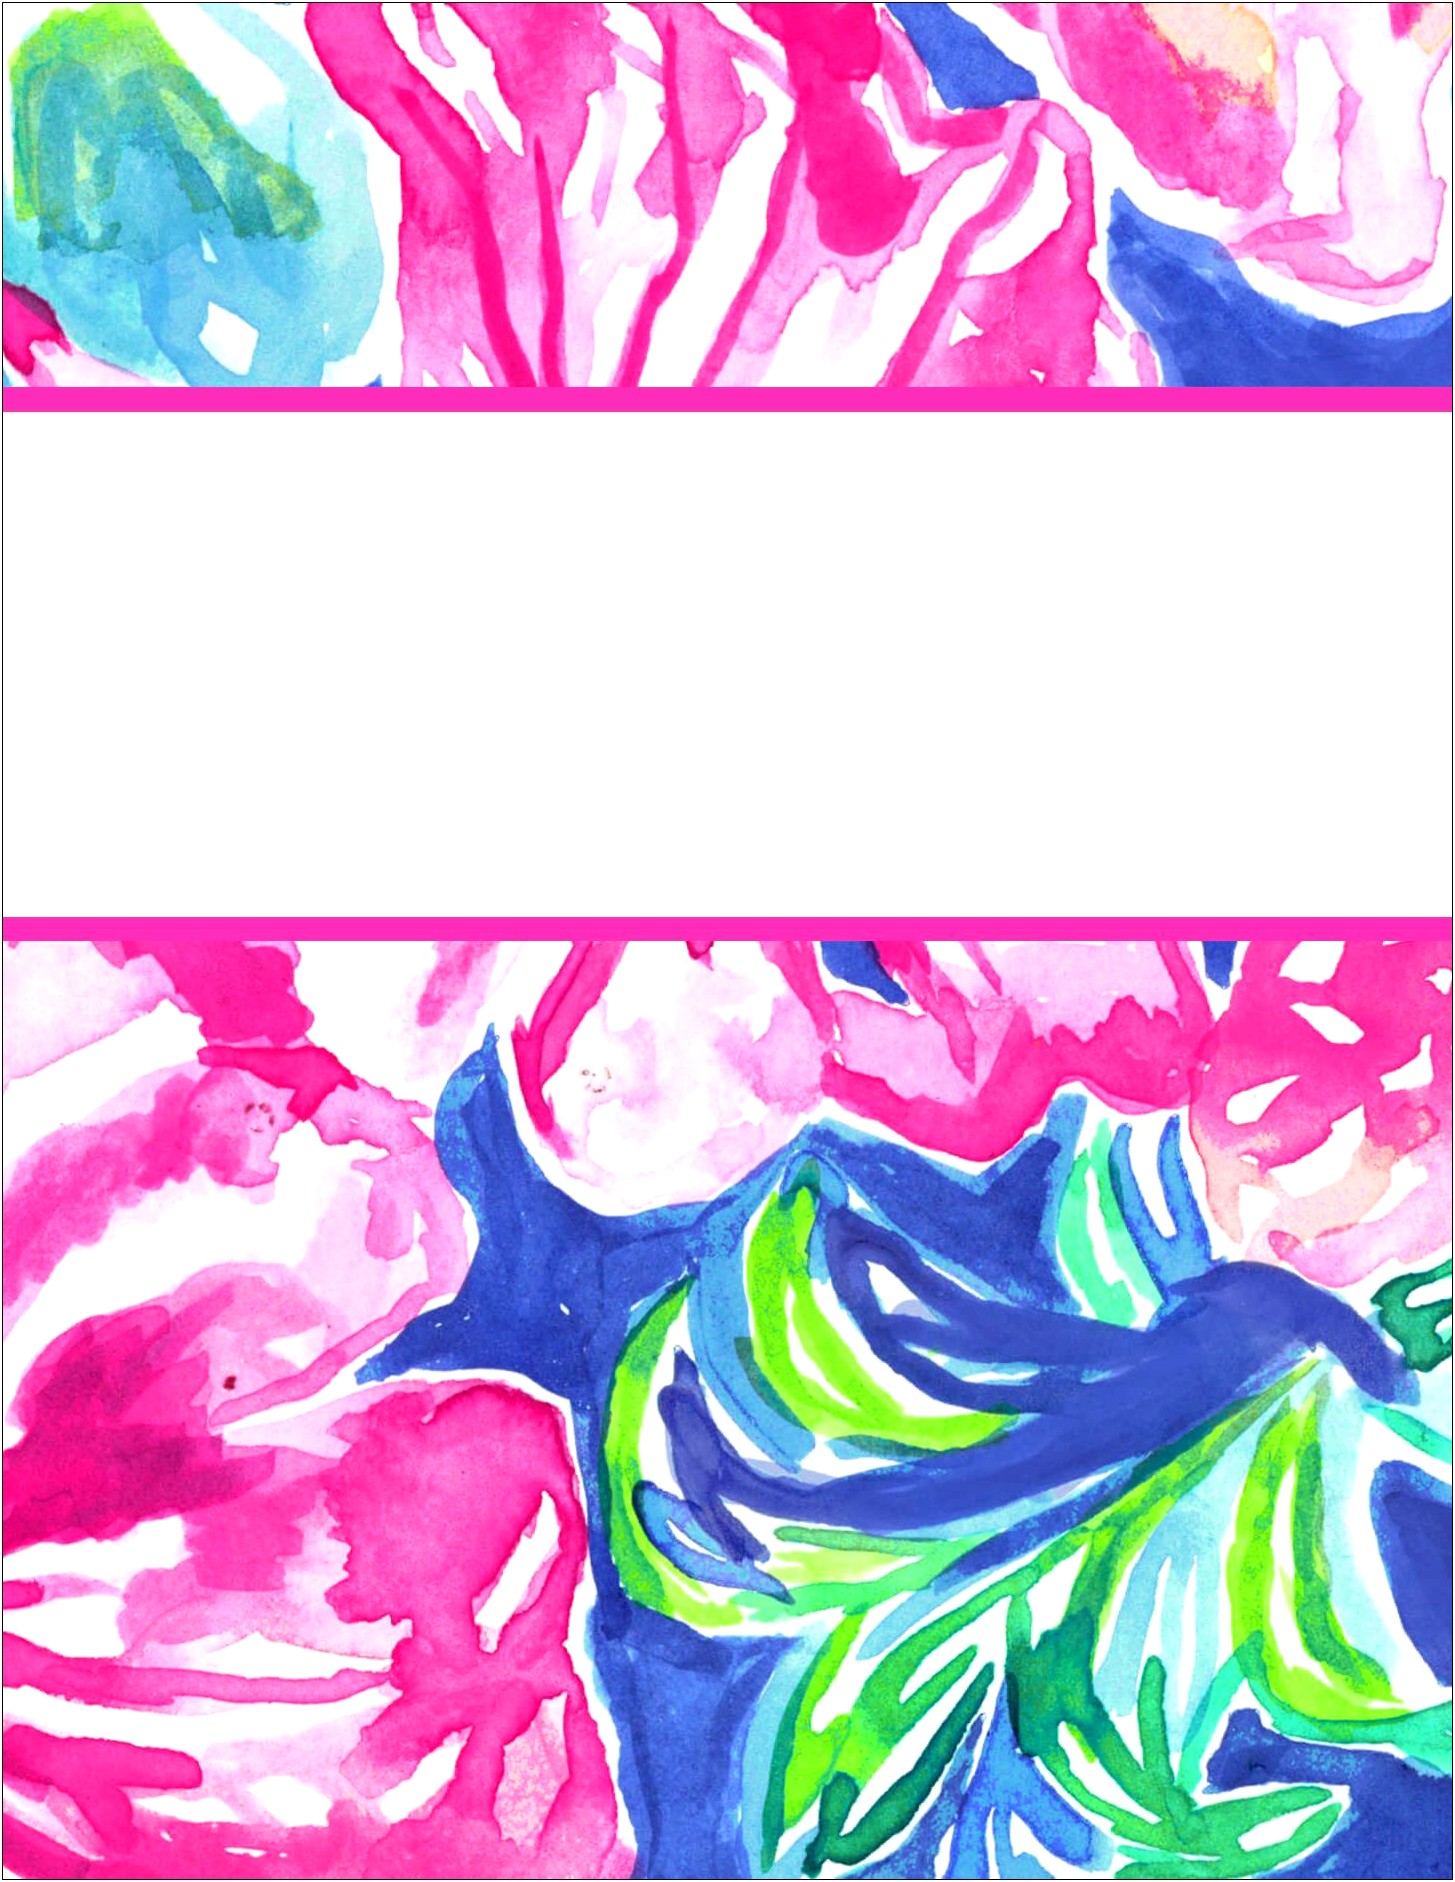 Lilly Pulitzer Binder Cover Template Free